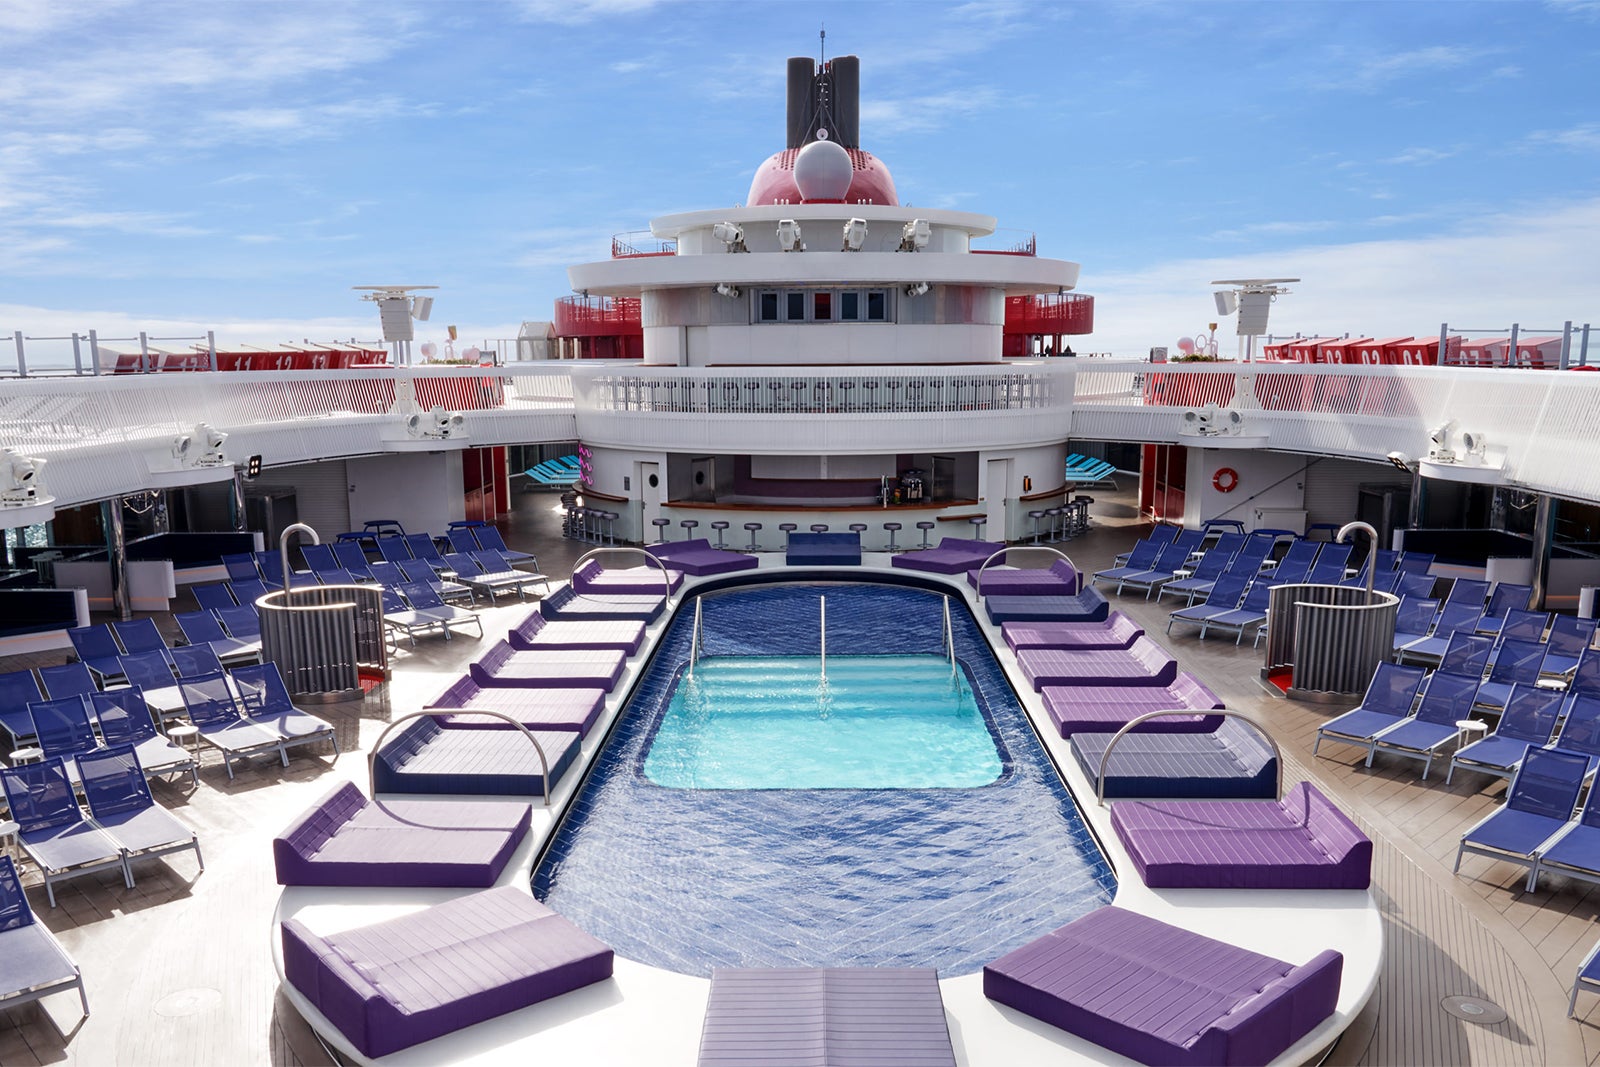 Exclusive: Virgin Voyages to debut cruise loyalty program in 2023, with temporary perks available now - The Points Guy